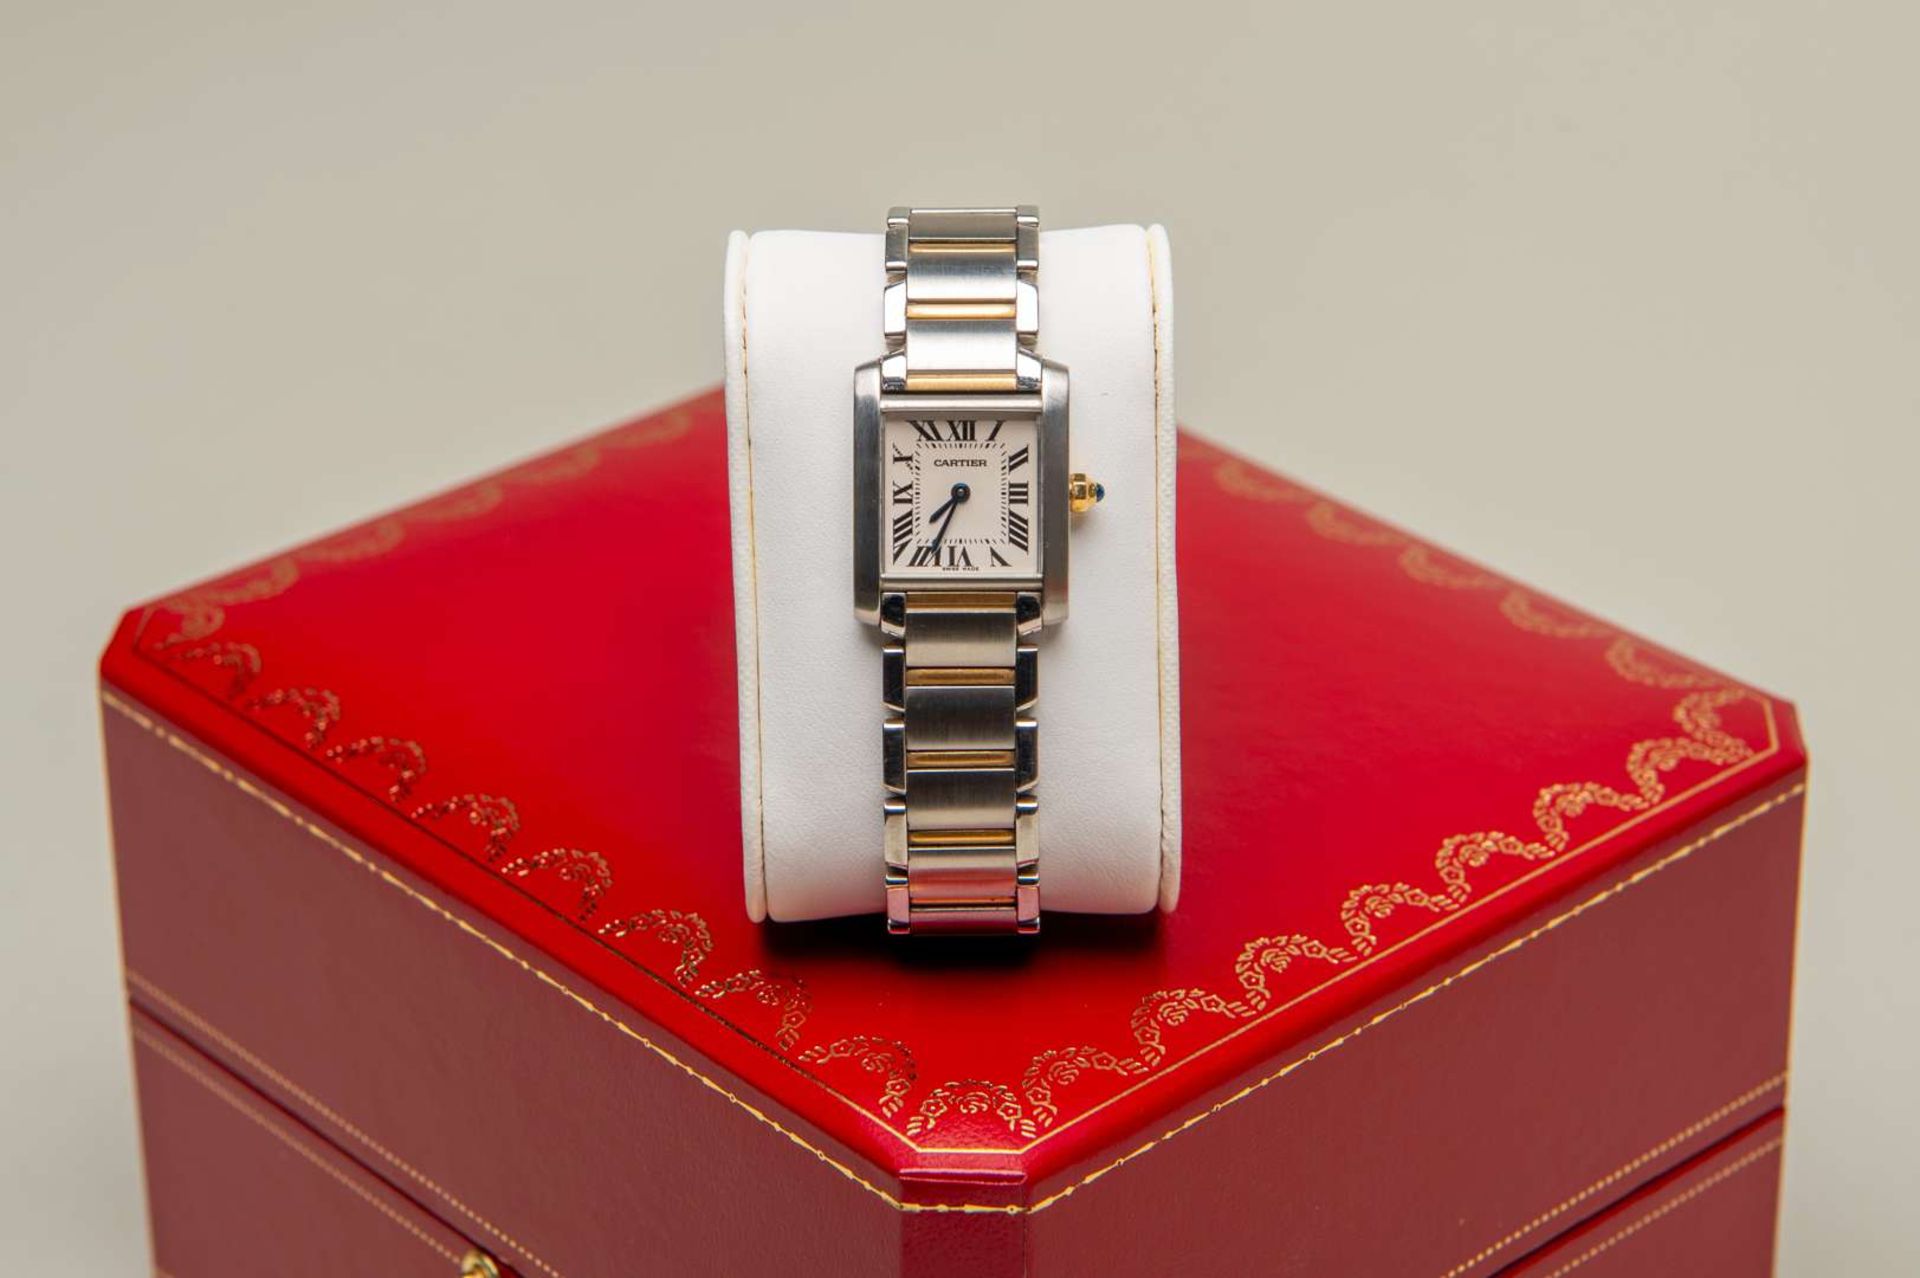 CARTIER, ladies TANK FRANCAISE, steel and gold quartz wristwatch. Ref 2384, - Image 7 of 10